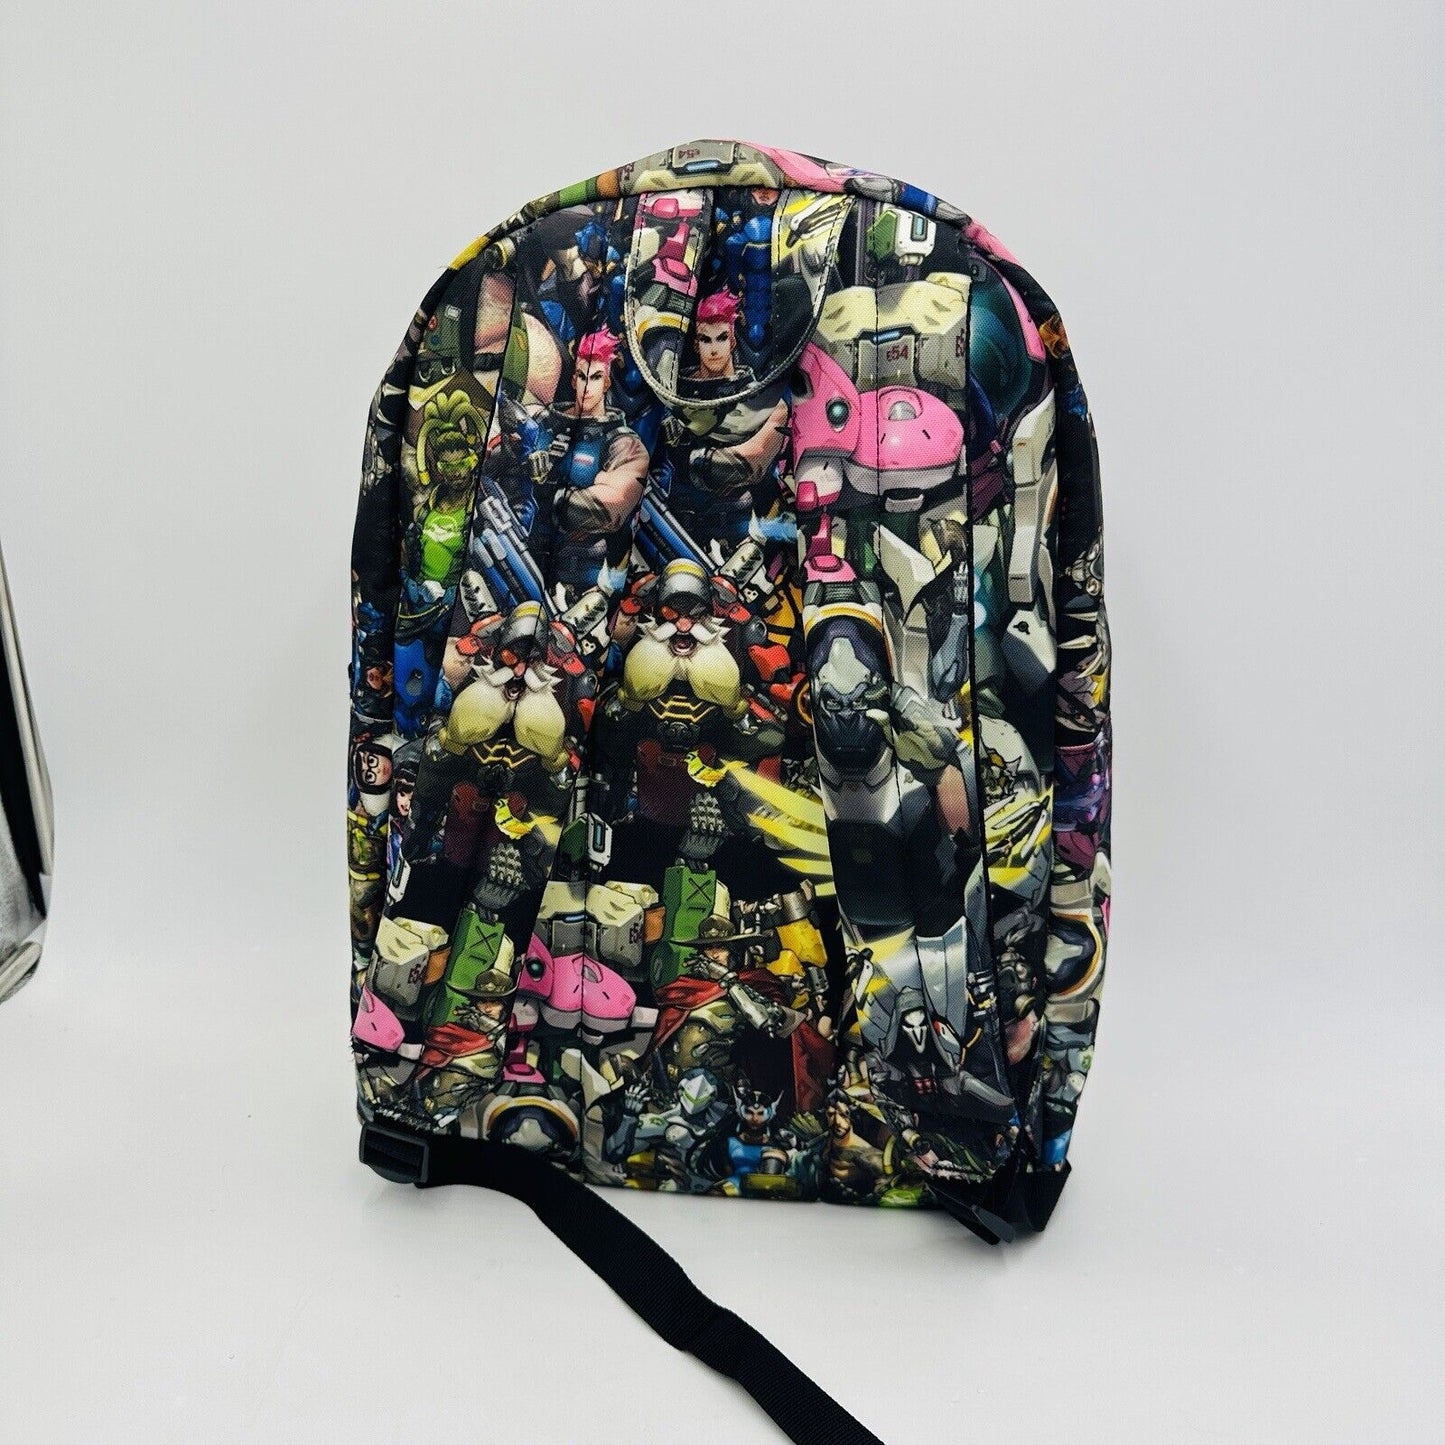 Loungefly Overwatch Character Collage Allover-Print Backpack Blizzard